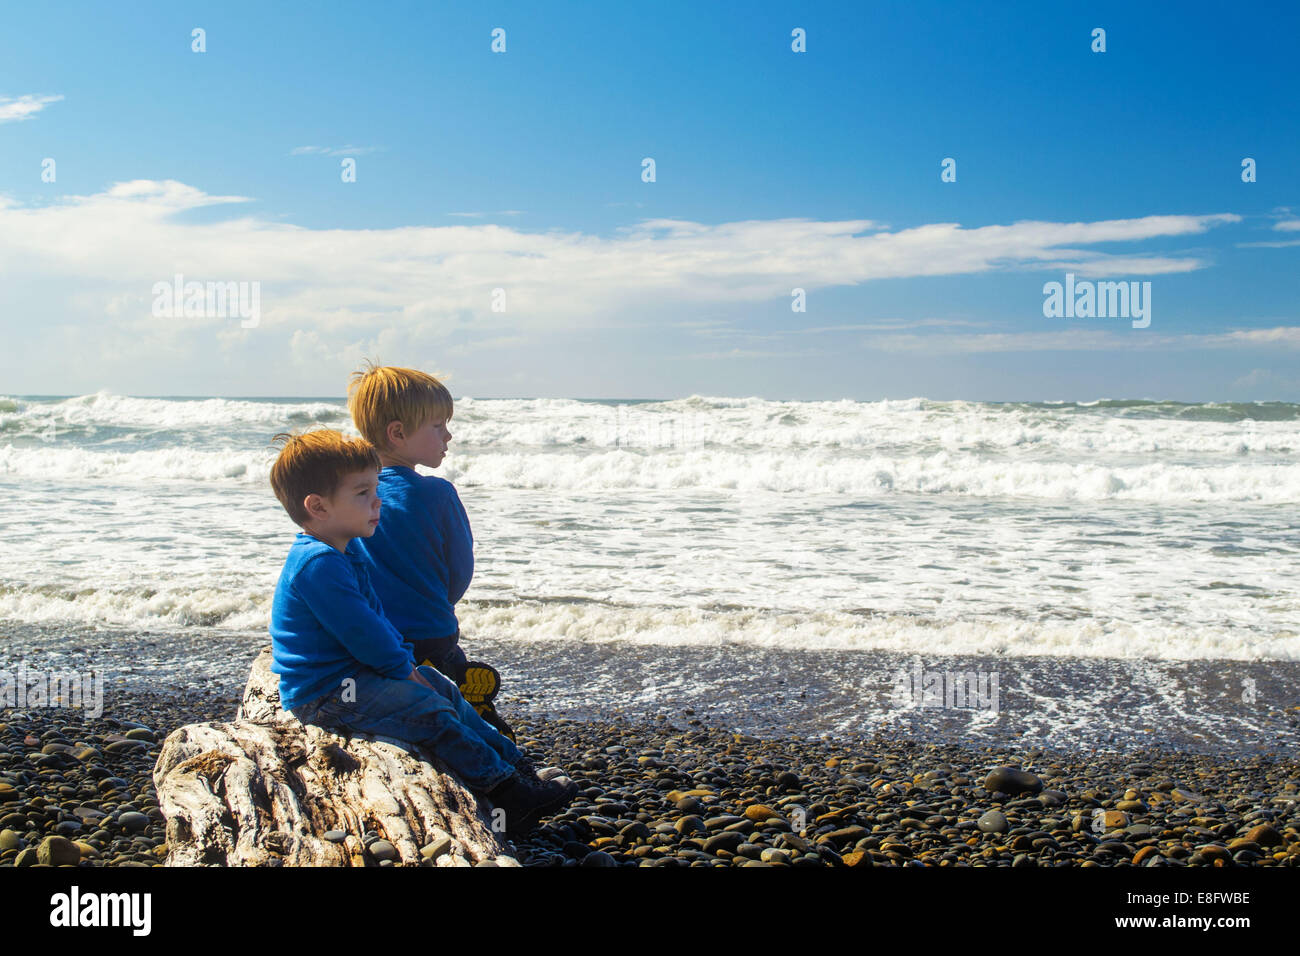 Two boys sitting on driftwood at the beach looking out to sea, USA Stock Photo